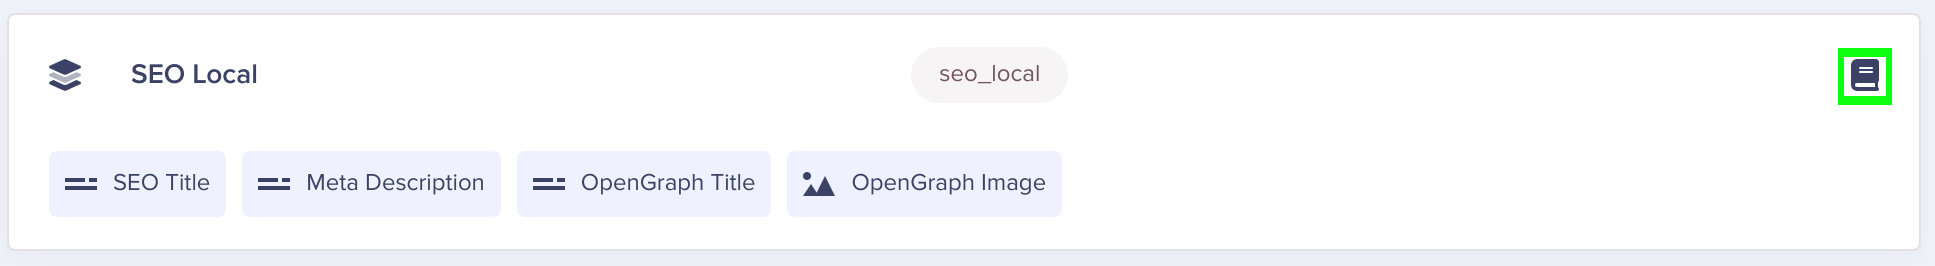 A Global SEO Component with a book icon in the top right corner